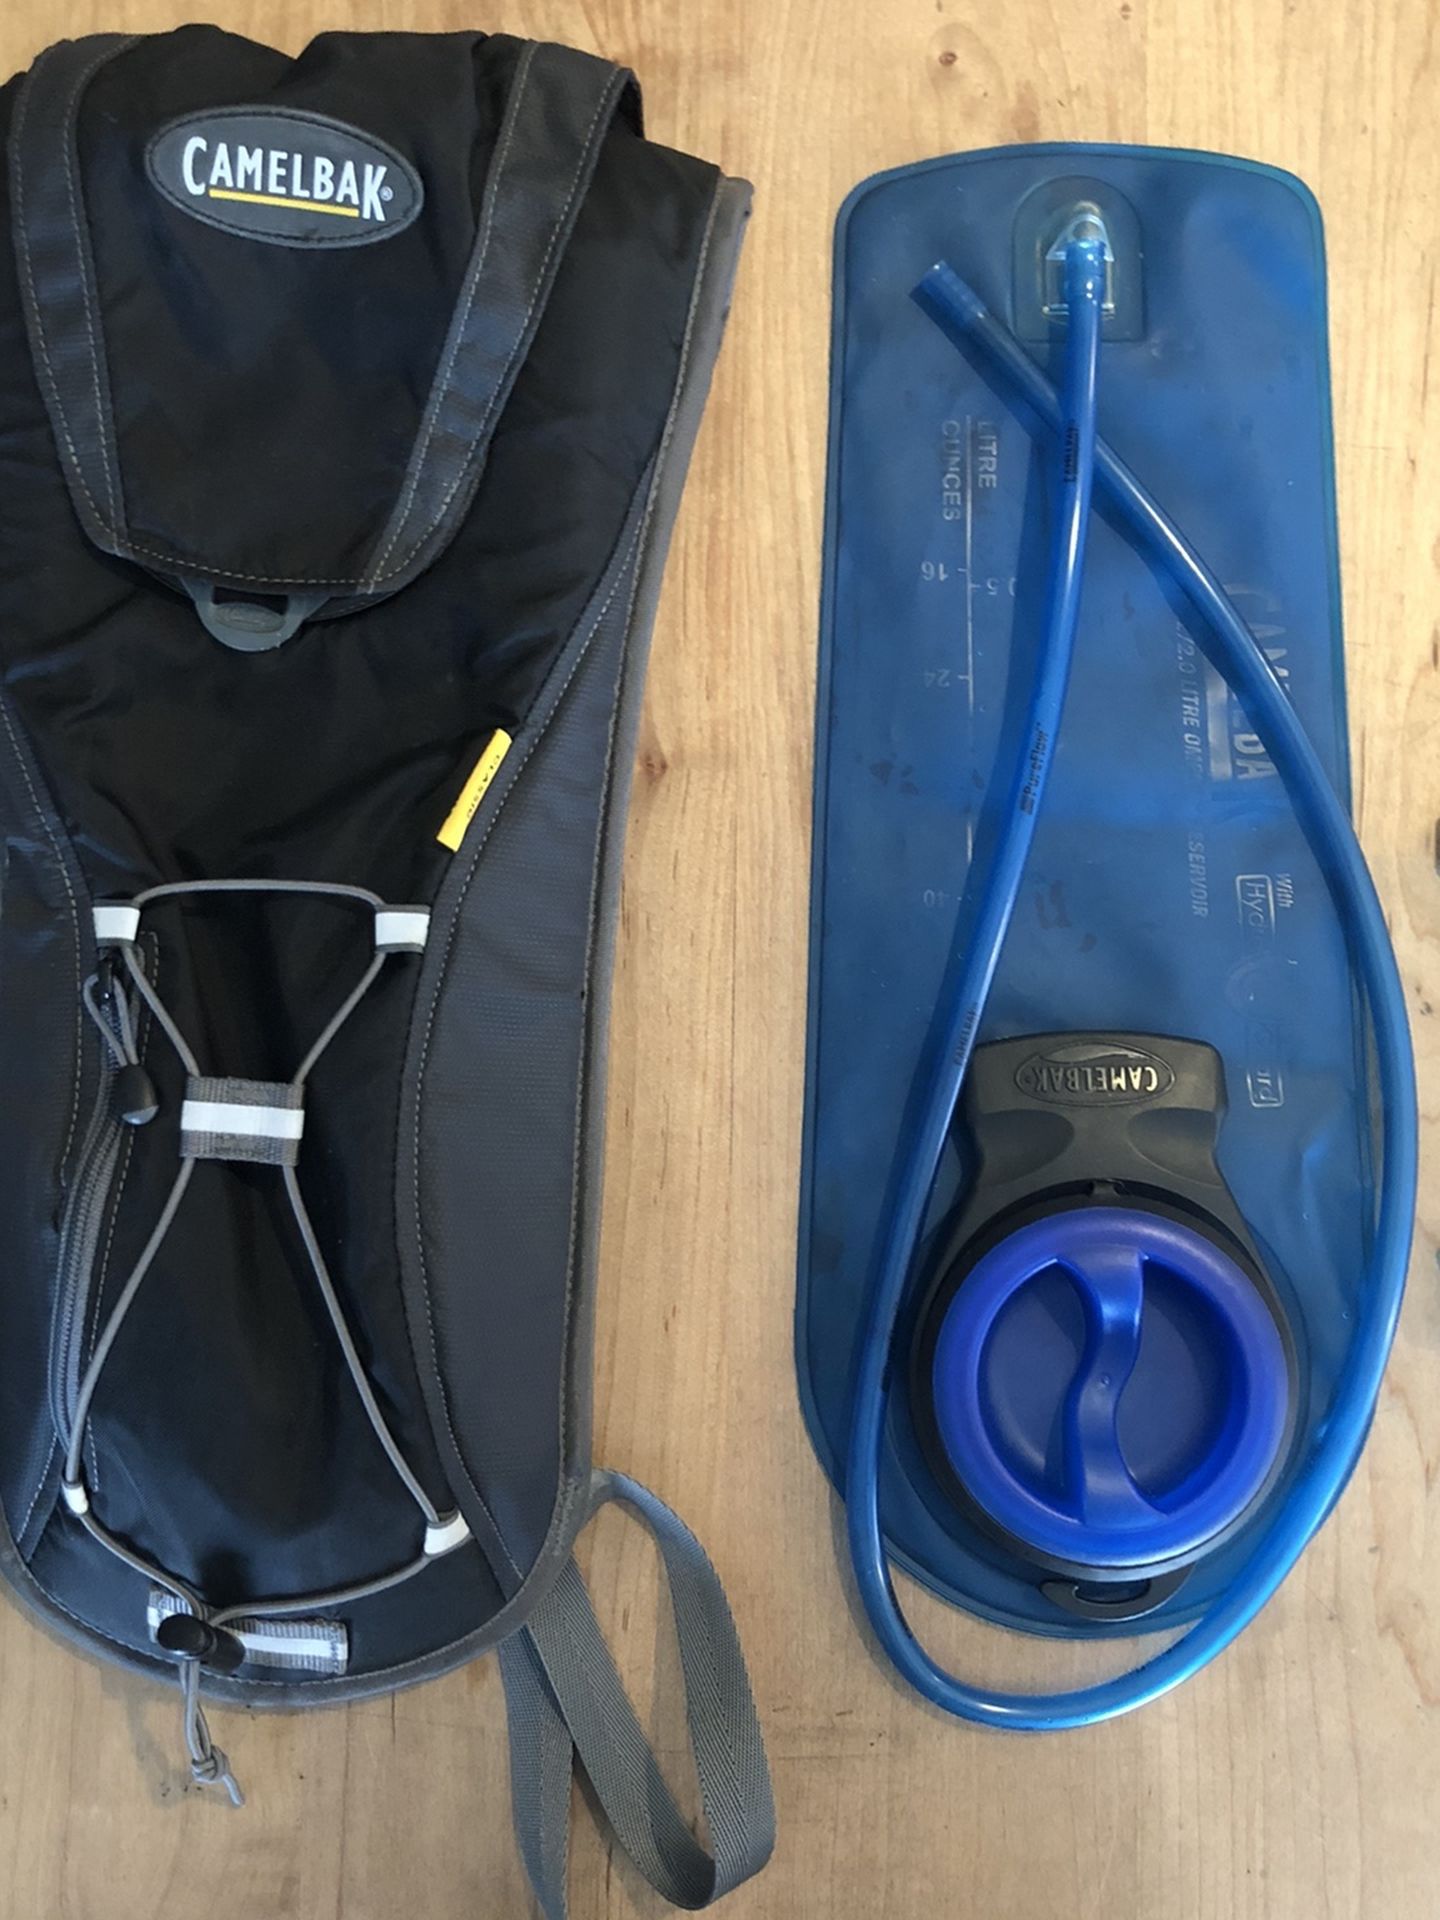 Camelbak Classic Hydration Pack Excellent Condition!